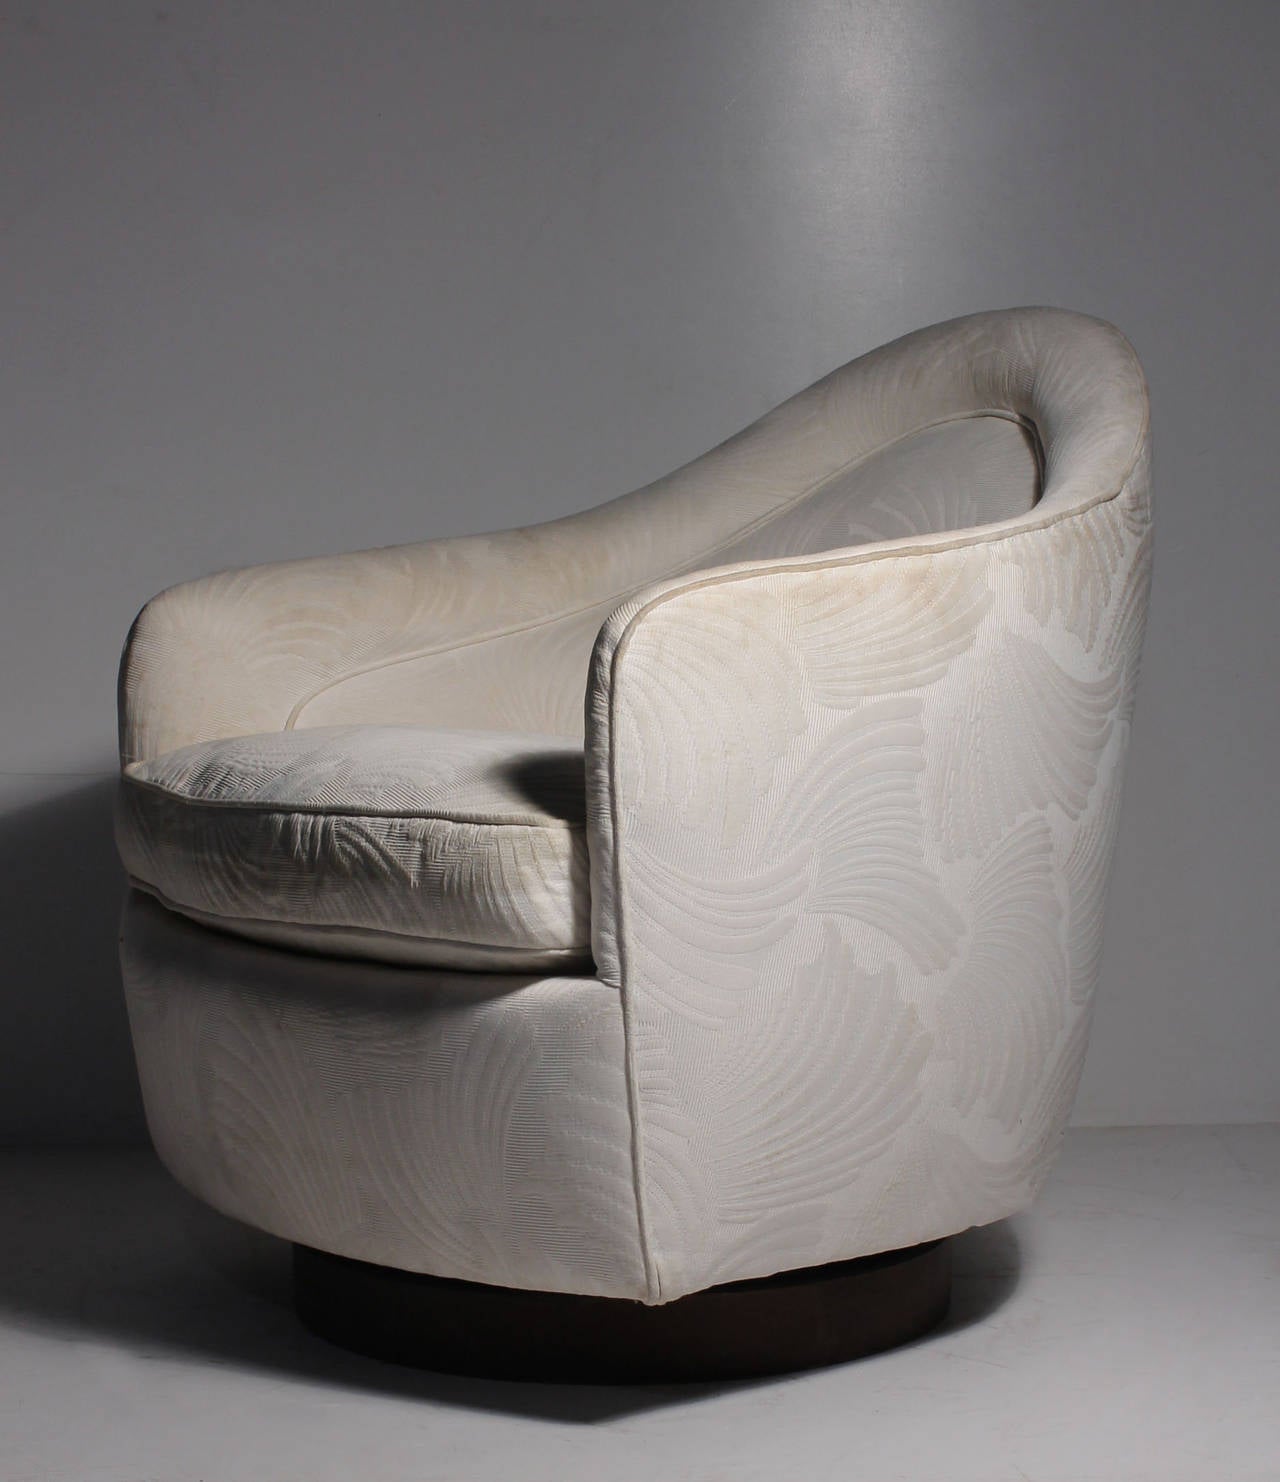 Milo Baughman Thayer Coggin Swivel_Reclining Lounge Chair

Most likely will need upholstery. If the existing fabric is desirable I can see if it clean ups. It may very well clean right up with a good steam clean. Please contact to discuss. Veneer